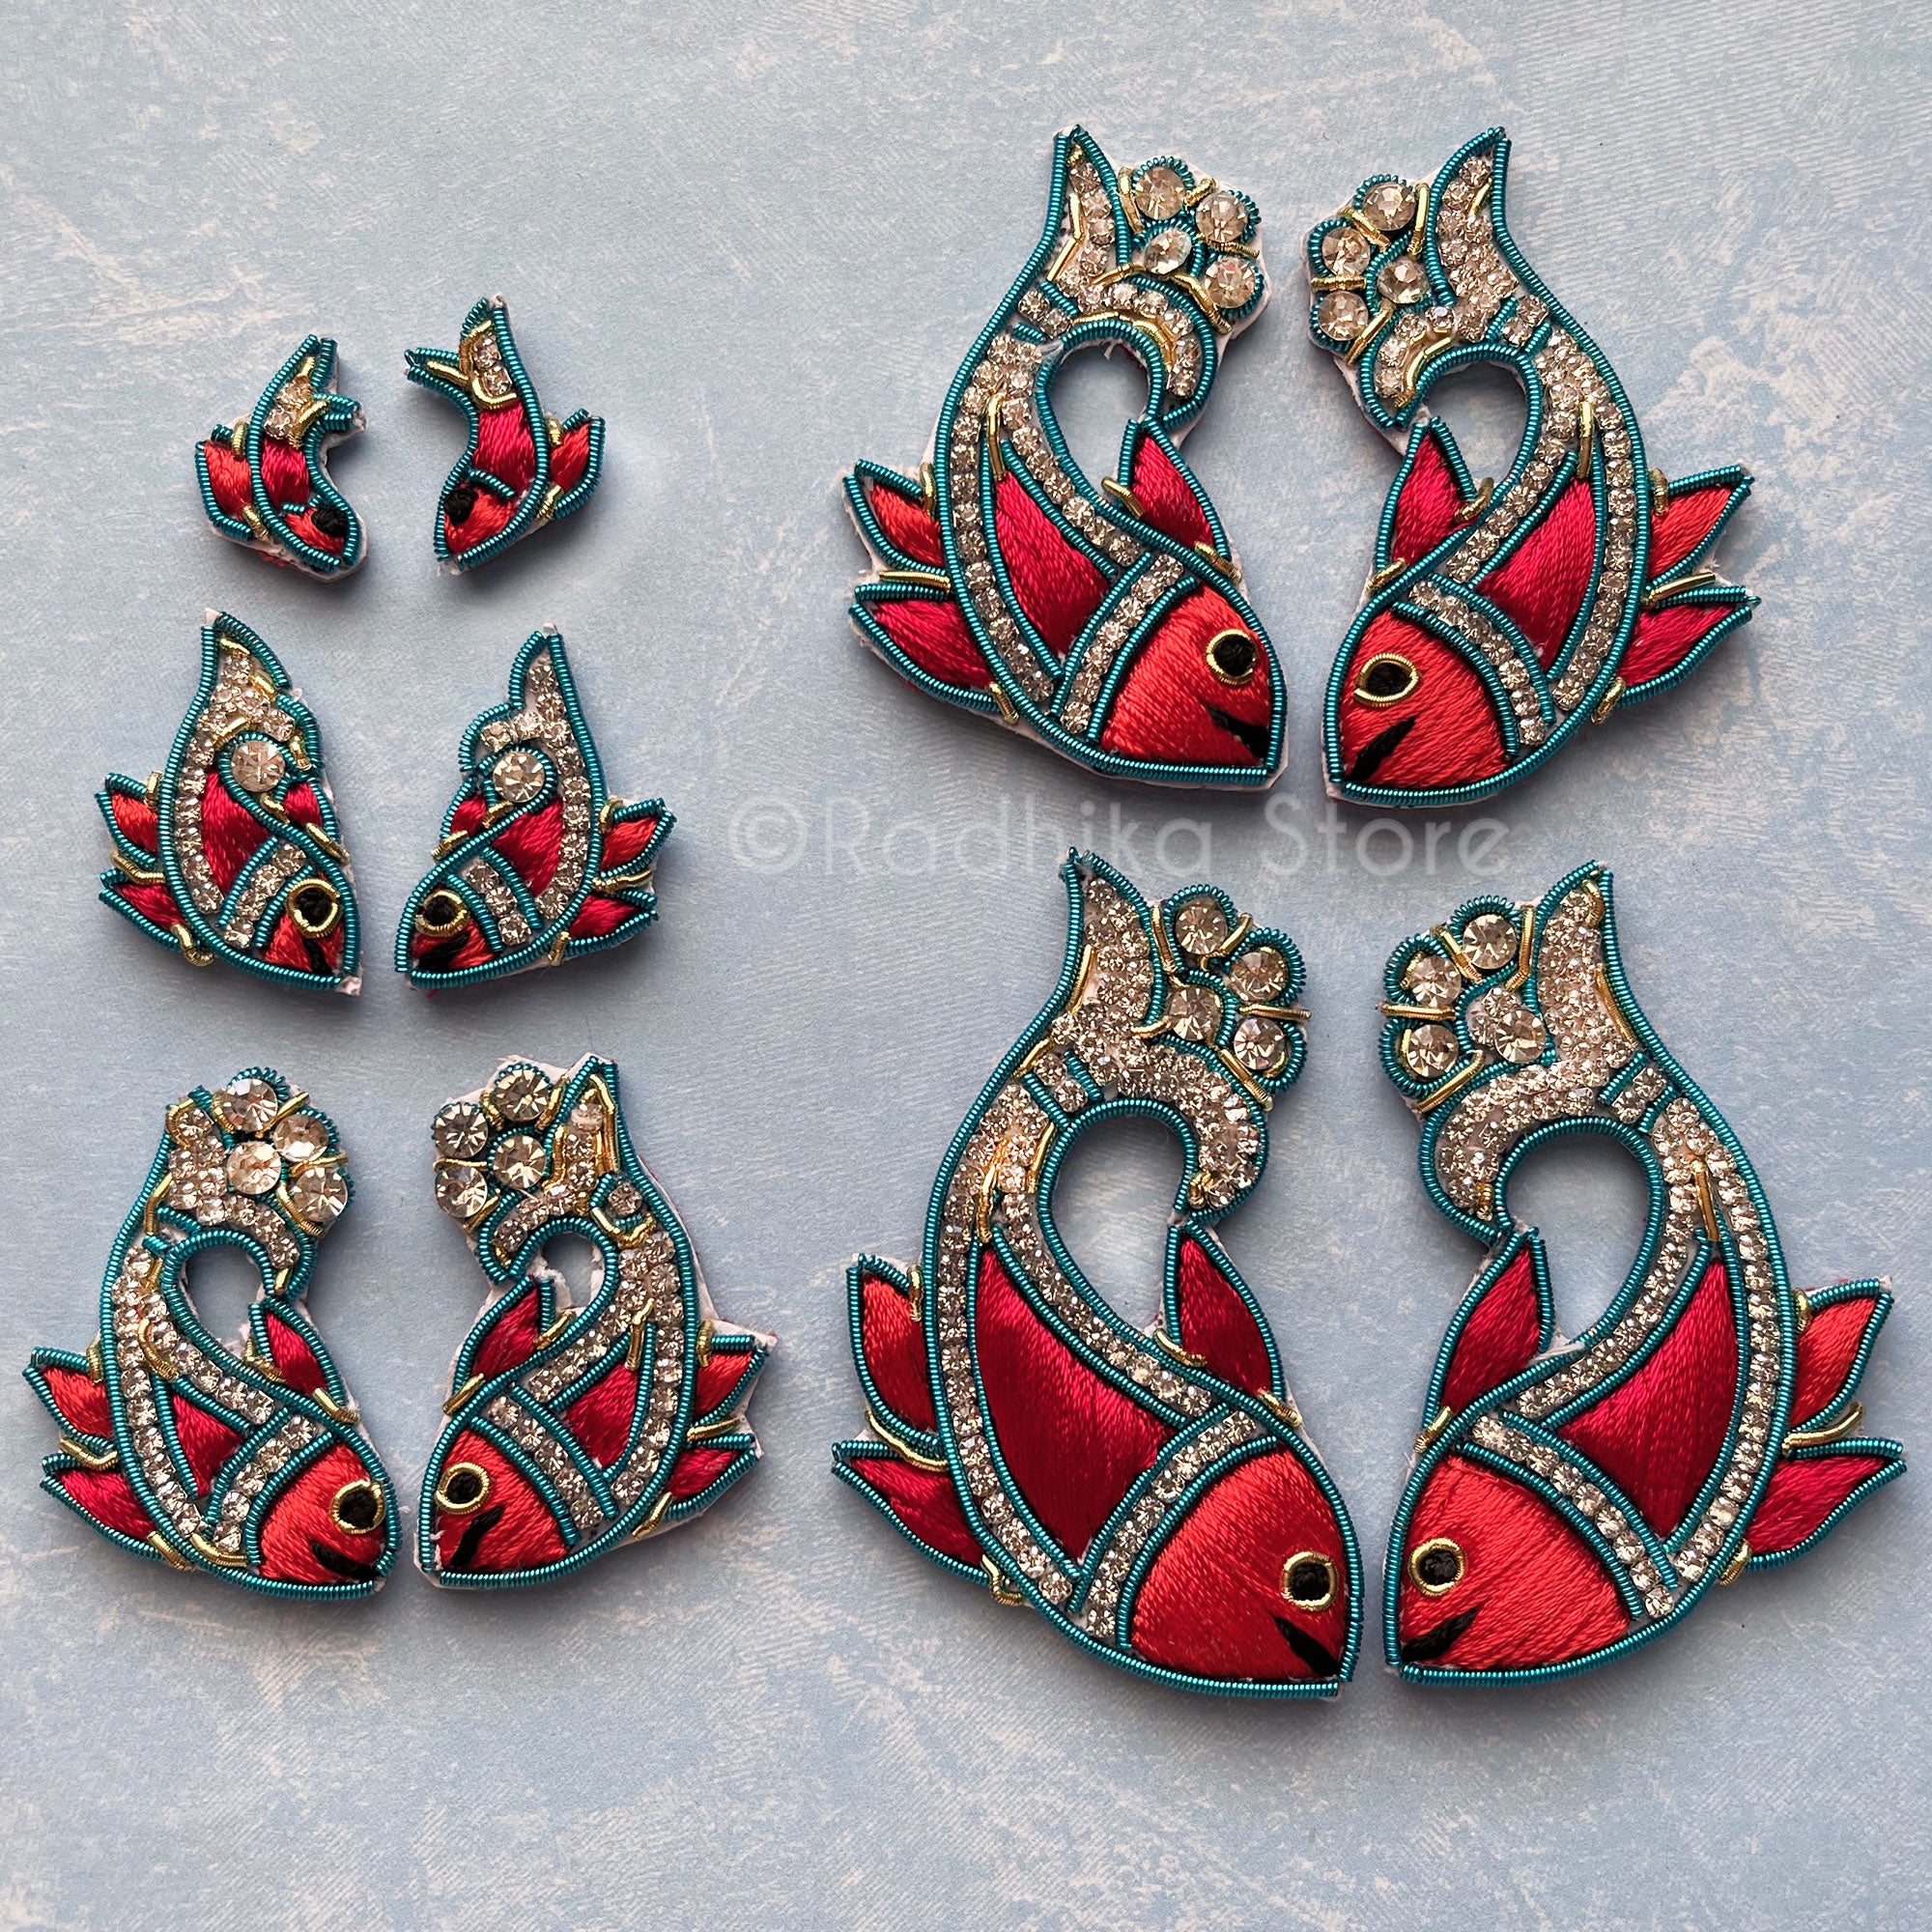 Red and Teal - Matsya Embroidery - Set of 2 Turban Pins/Earrings